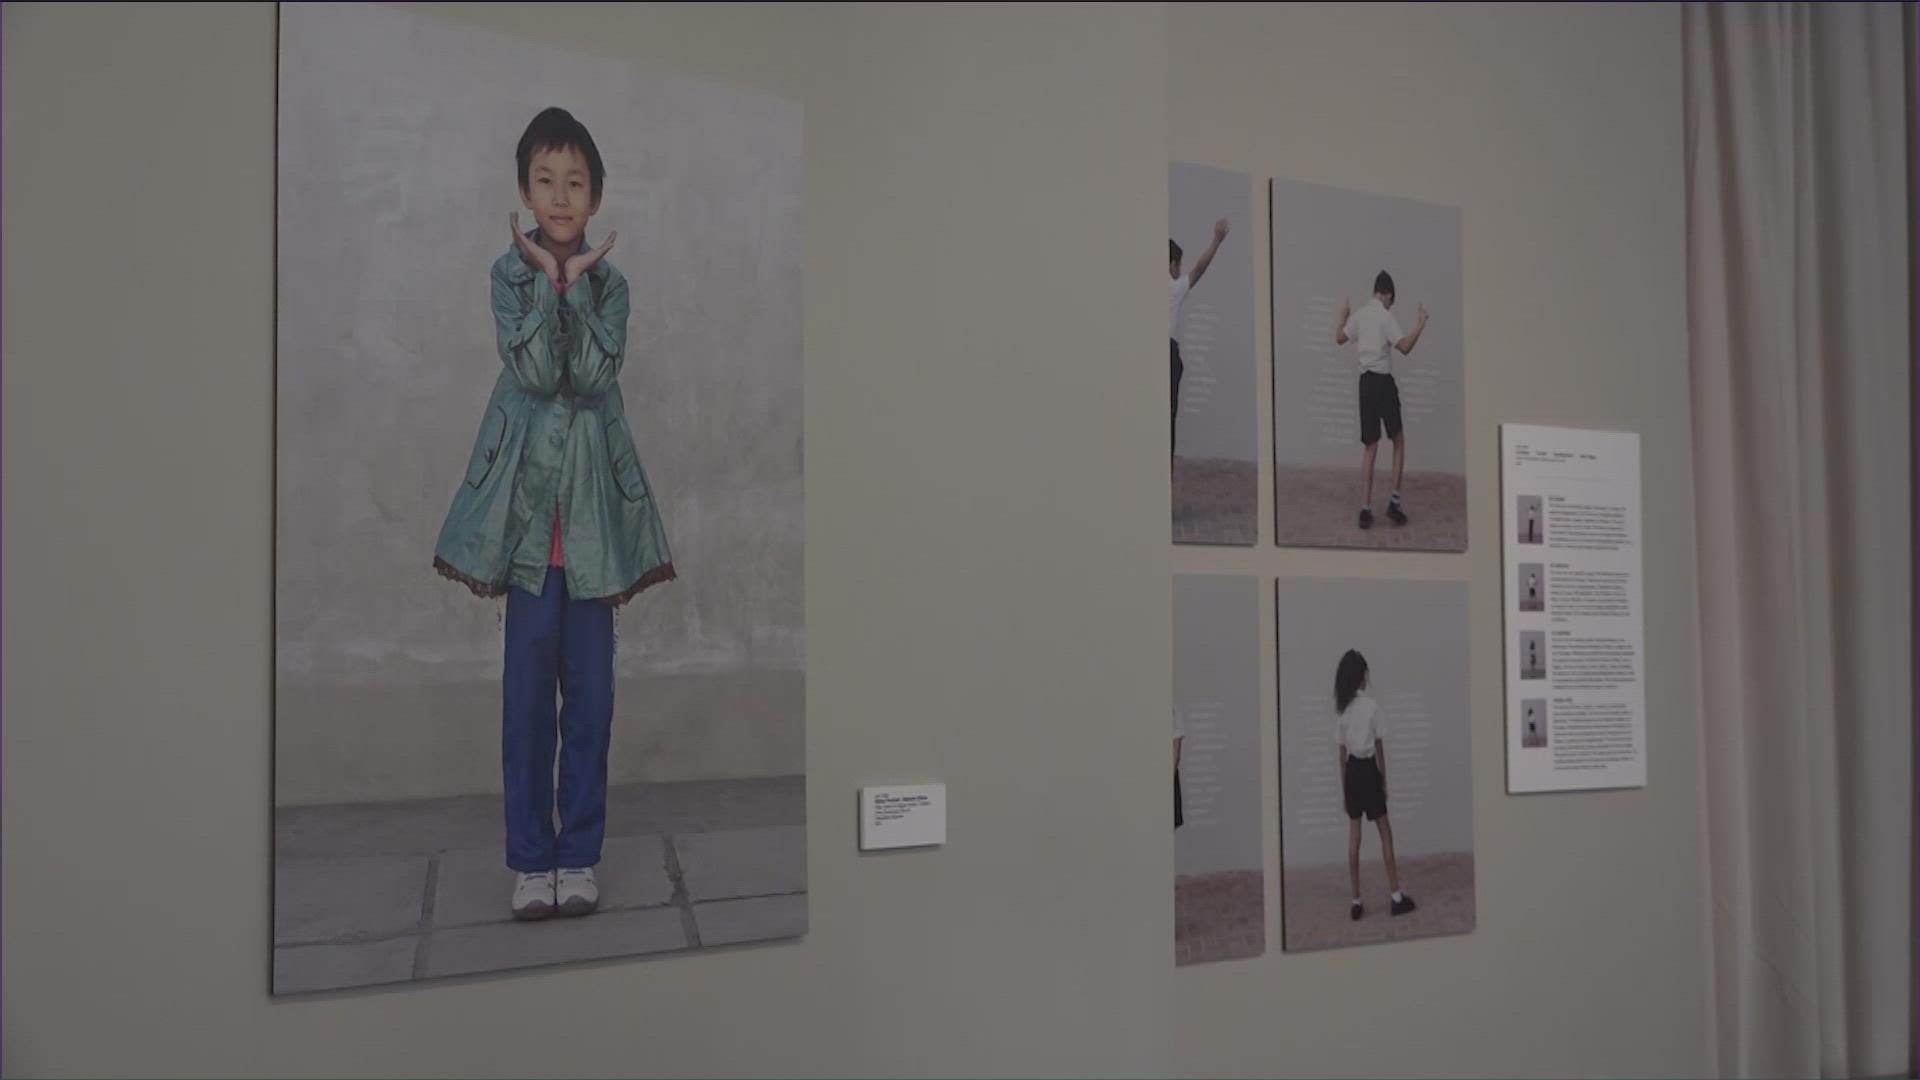 The exhibition features photographs and insights from fourth-graders around the world.